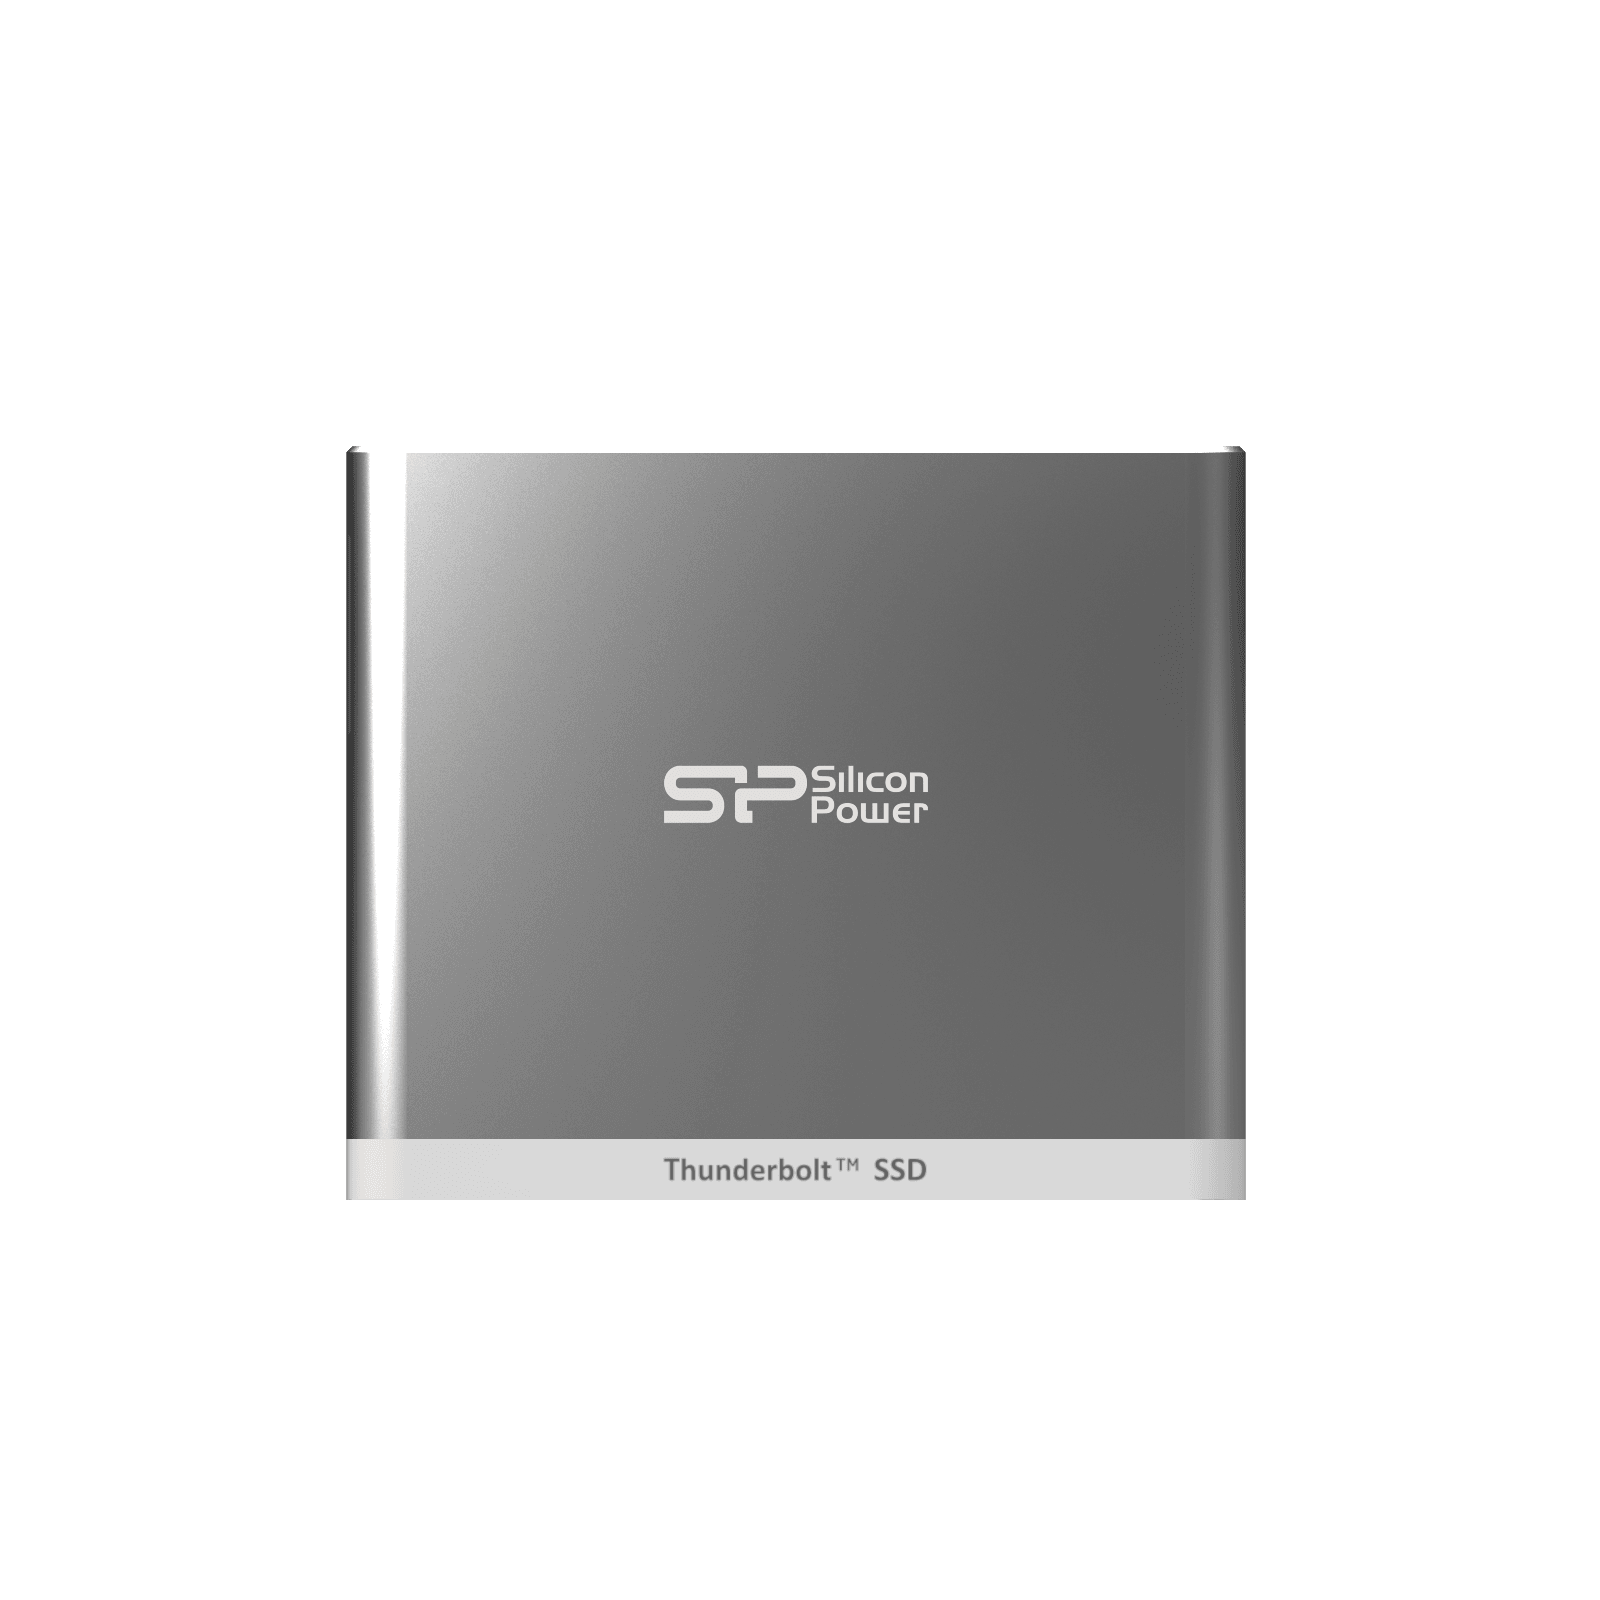 SP/ Silicon Power Meluncurkan Superior External Thunderbolt Palm Drive Thunder T11